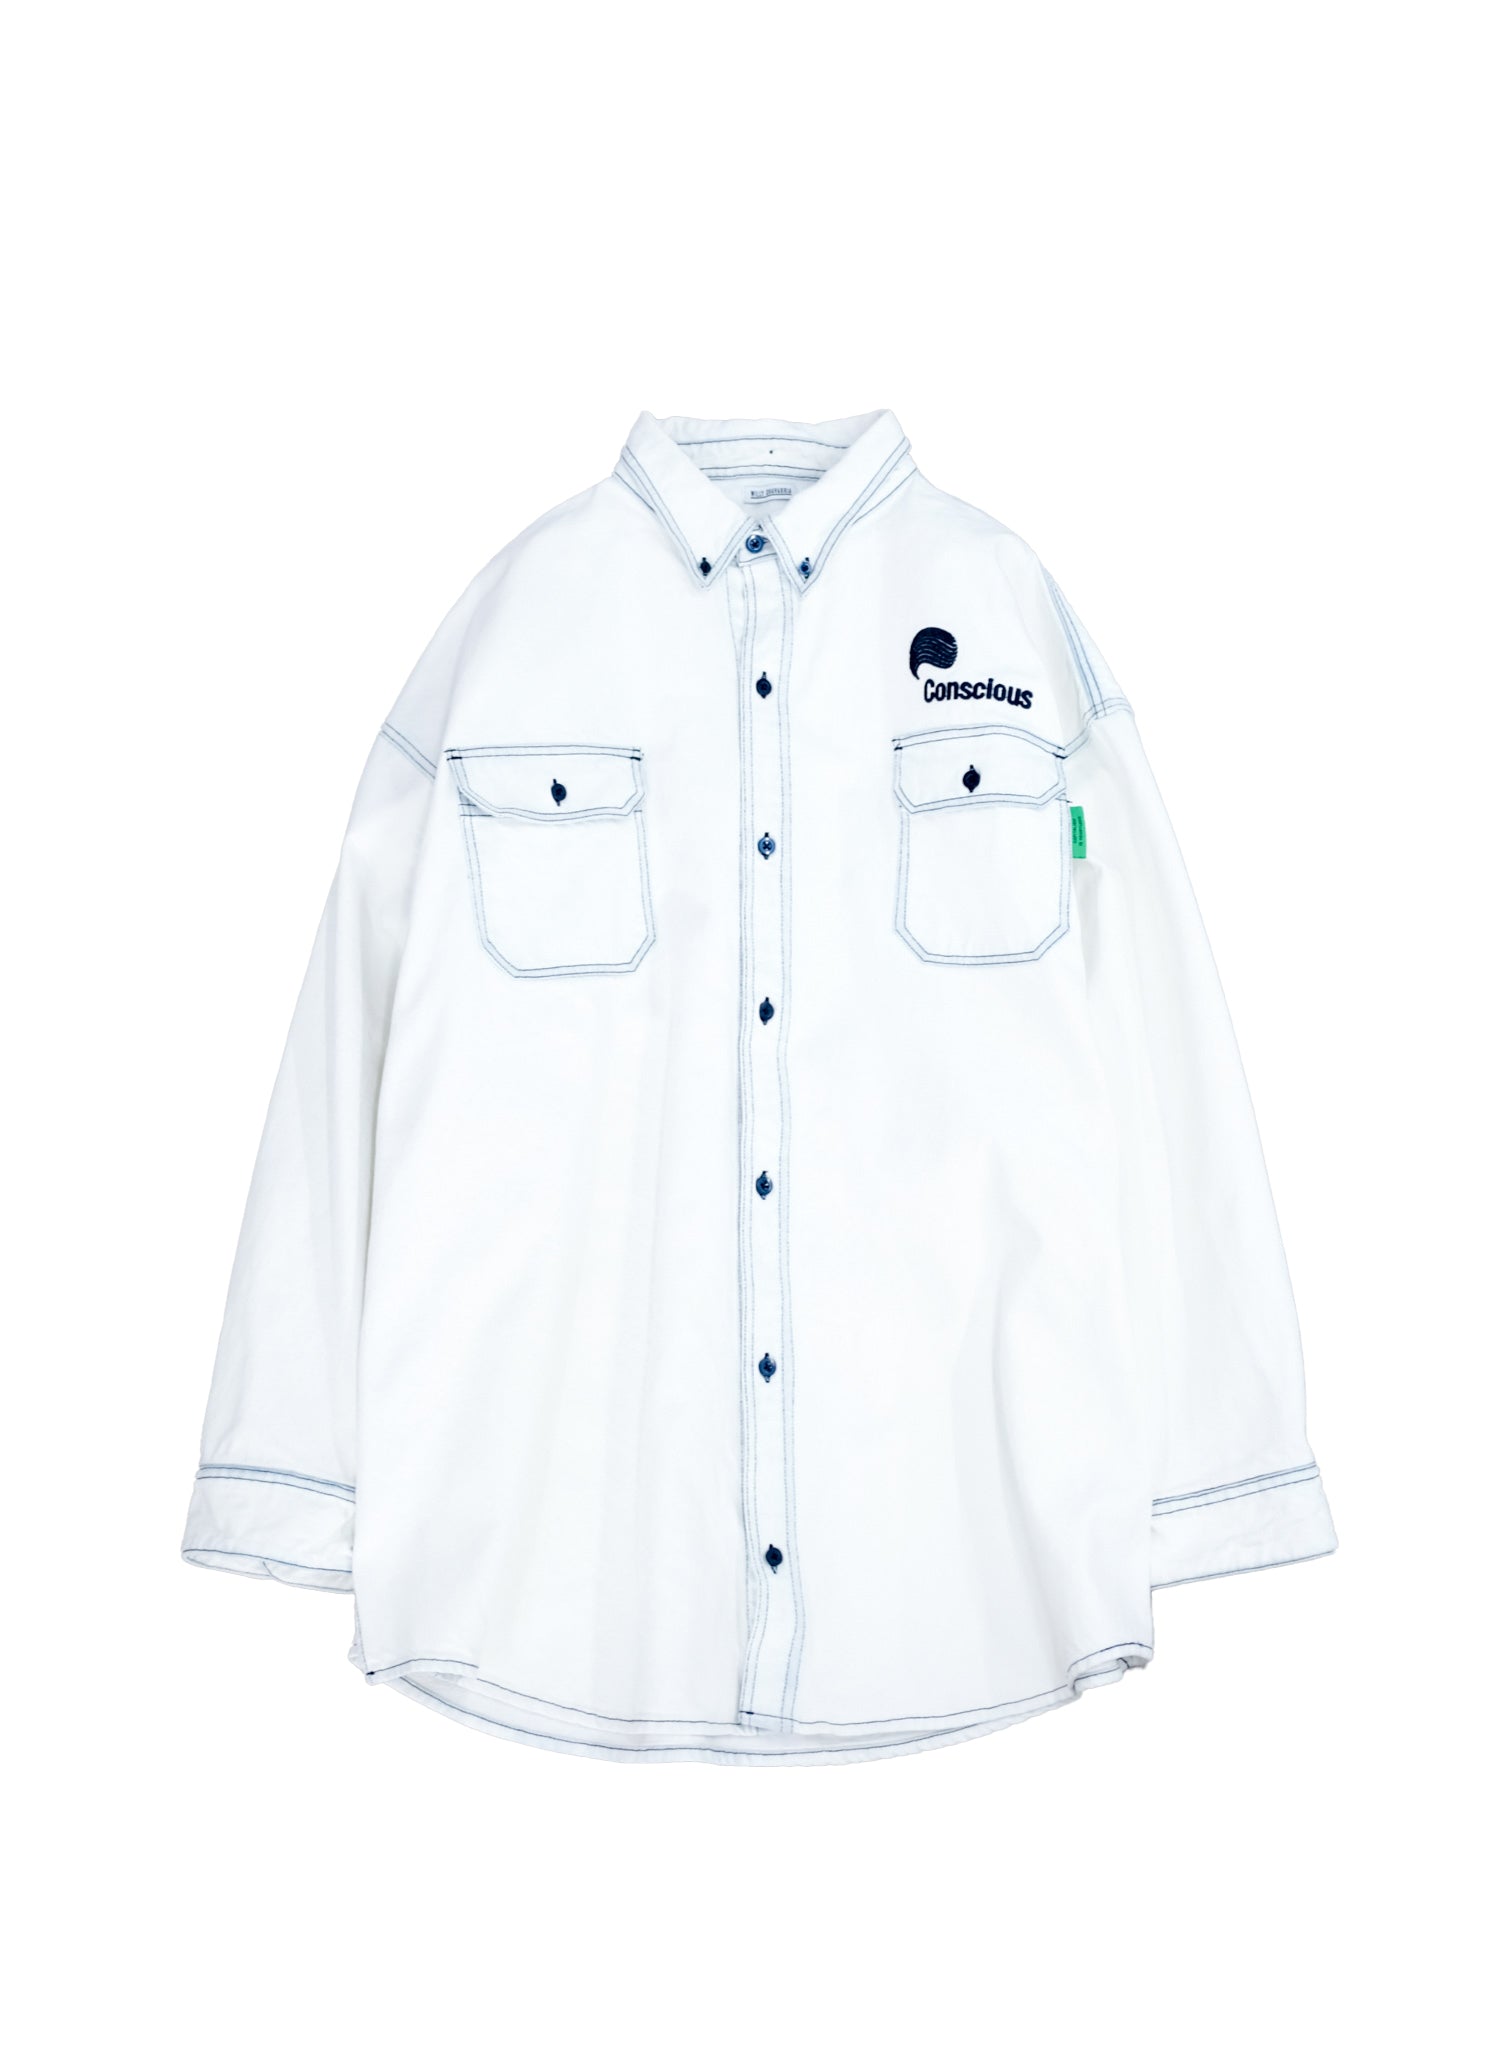 Last One WILLY CHAVARRIA / BIG DADDY BUTTON DOWN WHITE BLEACH